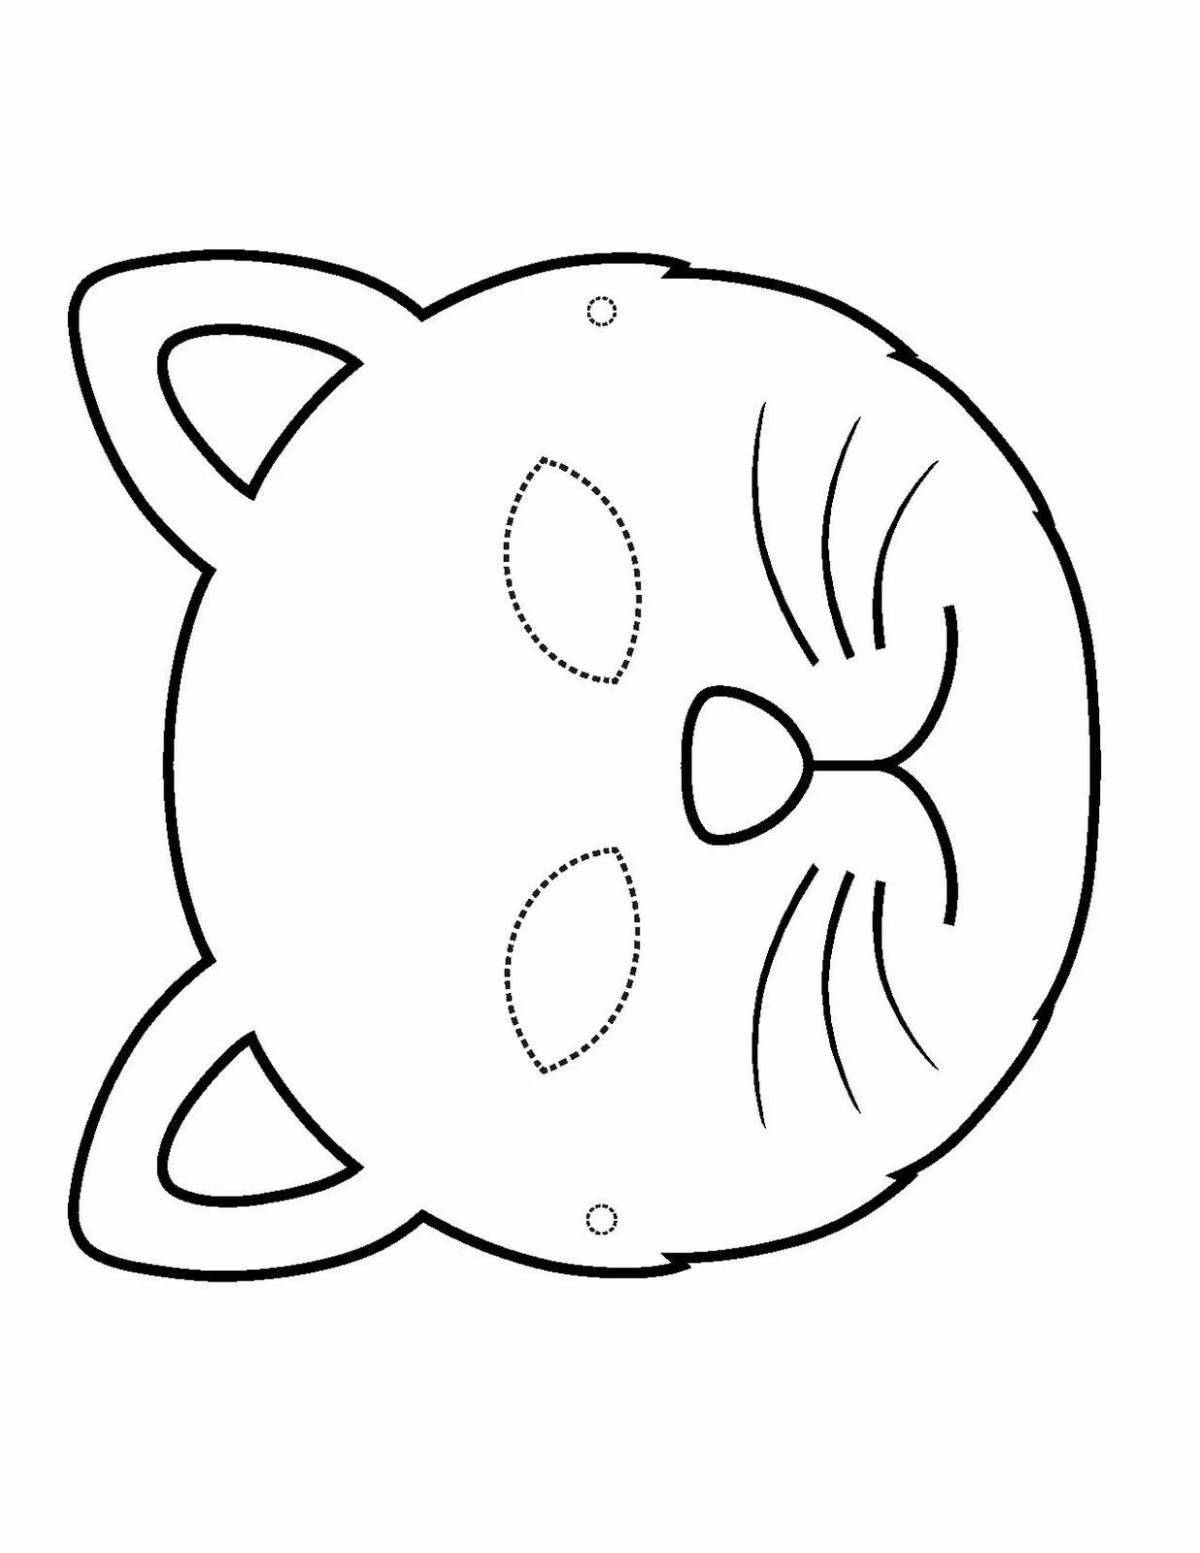 Coloring page beckoning cat mask